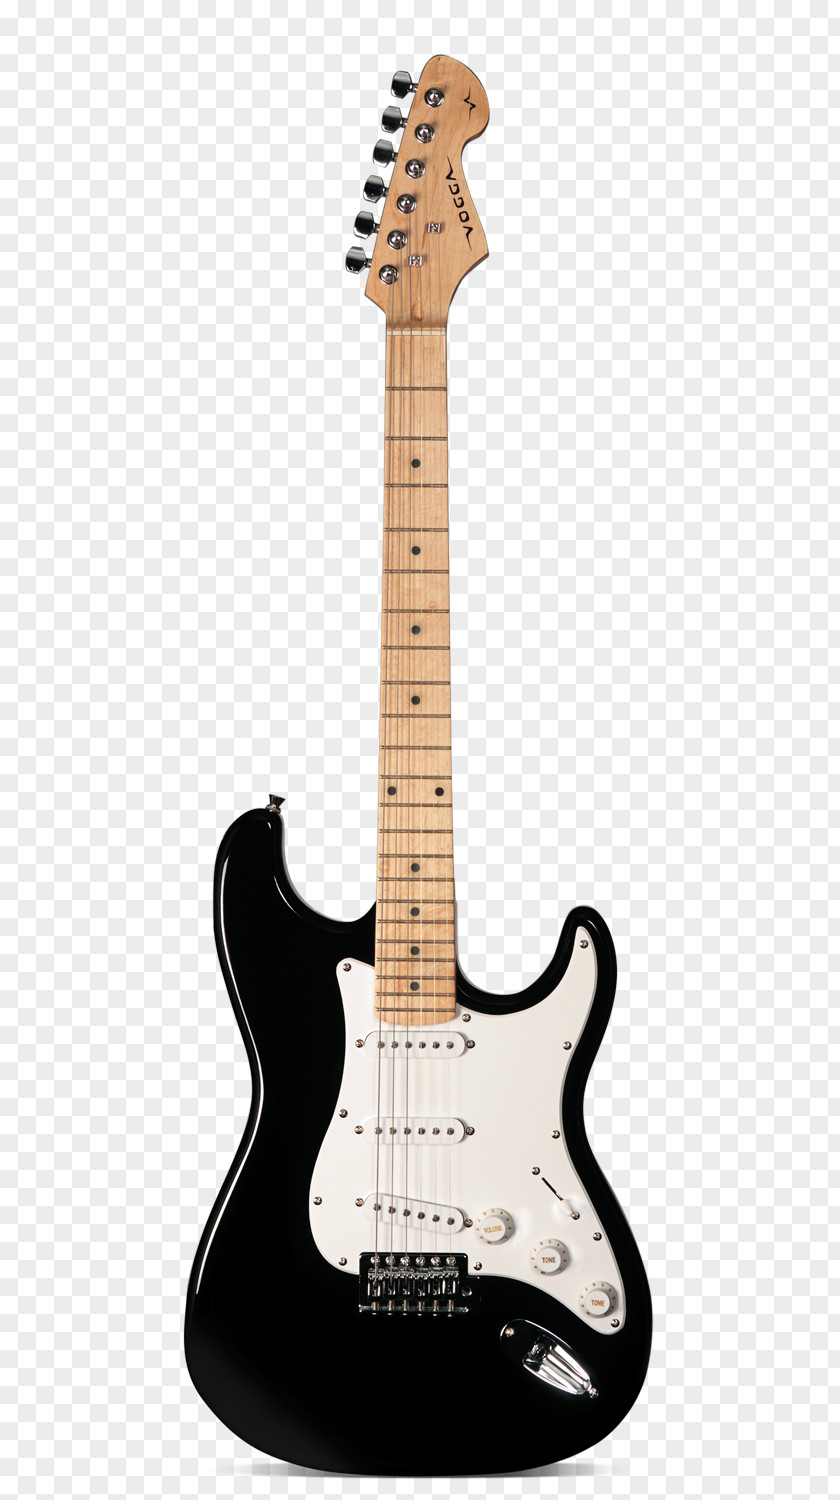 Musical Instrument Fender Stratocaster Squier Affinity Electric Guitar Precision Bass Instruments PNG